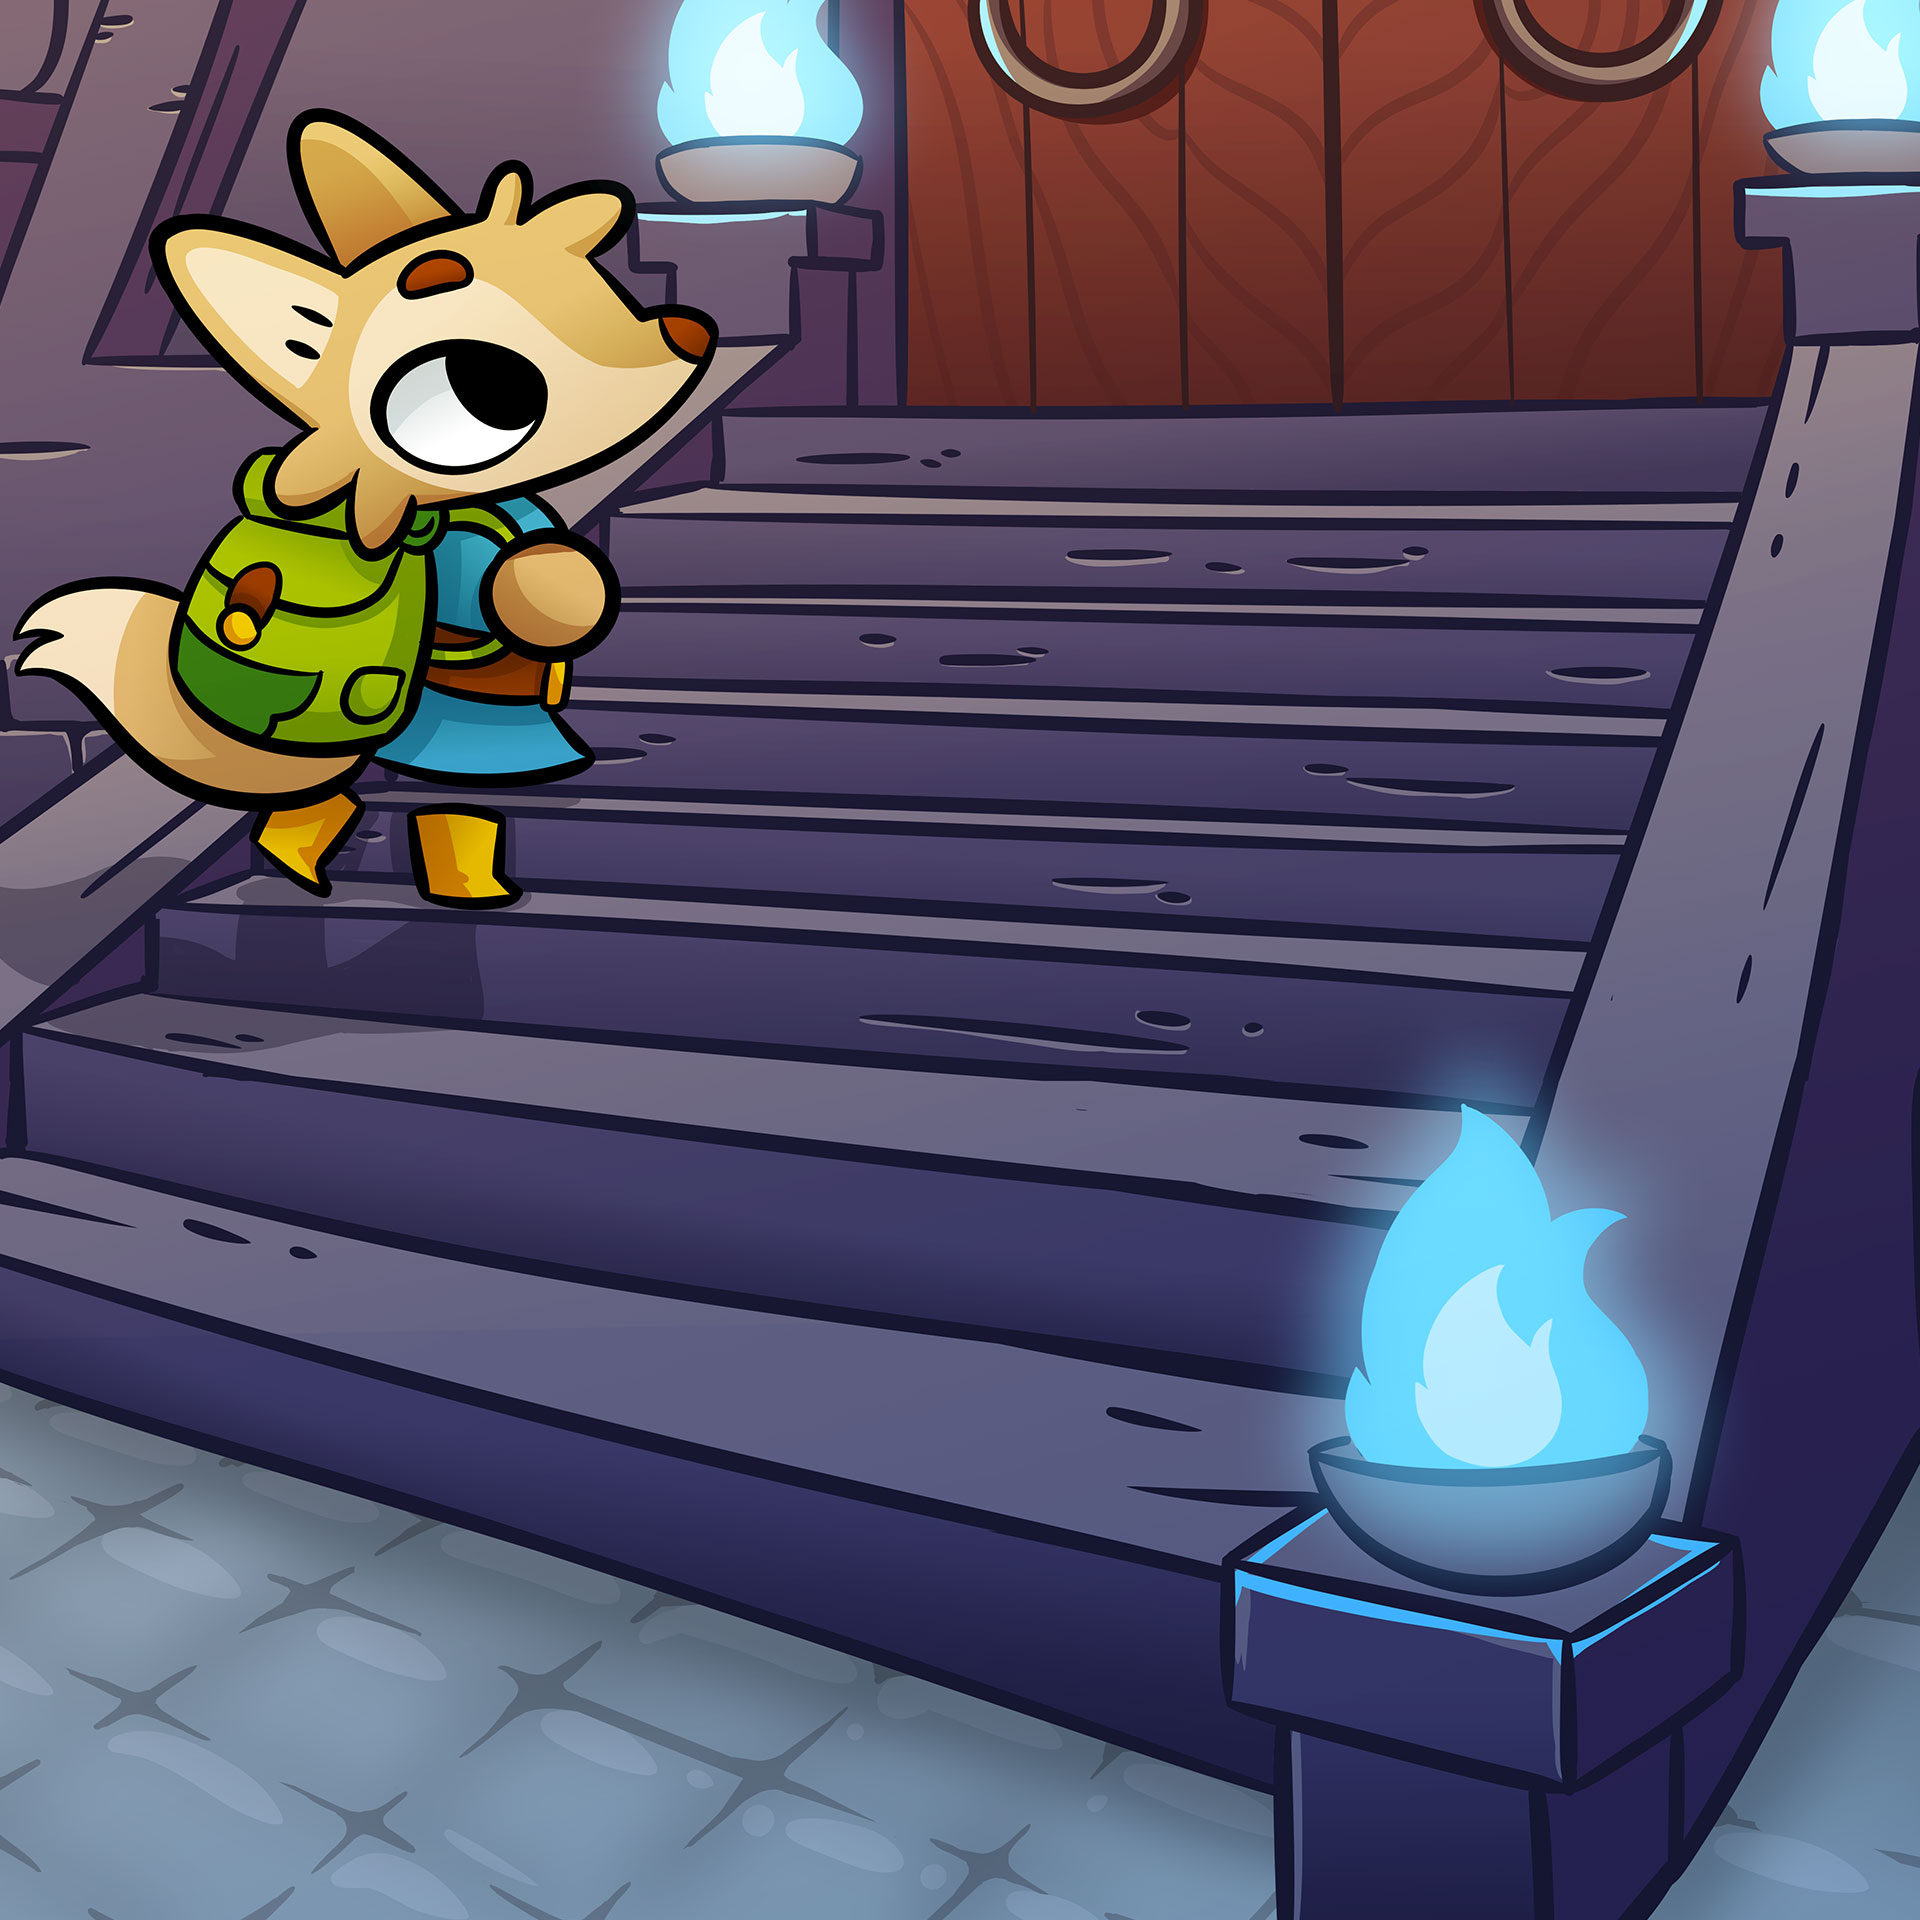 Lonesome Village Artwork of Wes the fox climbing stone stairs to a wooden door, lit by blue flame braziers